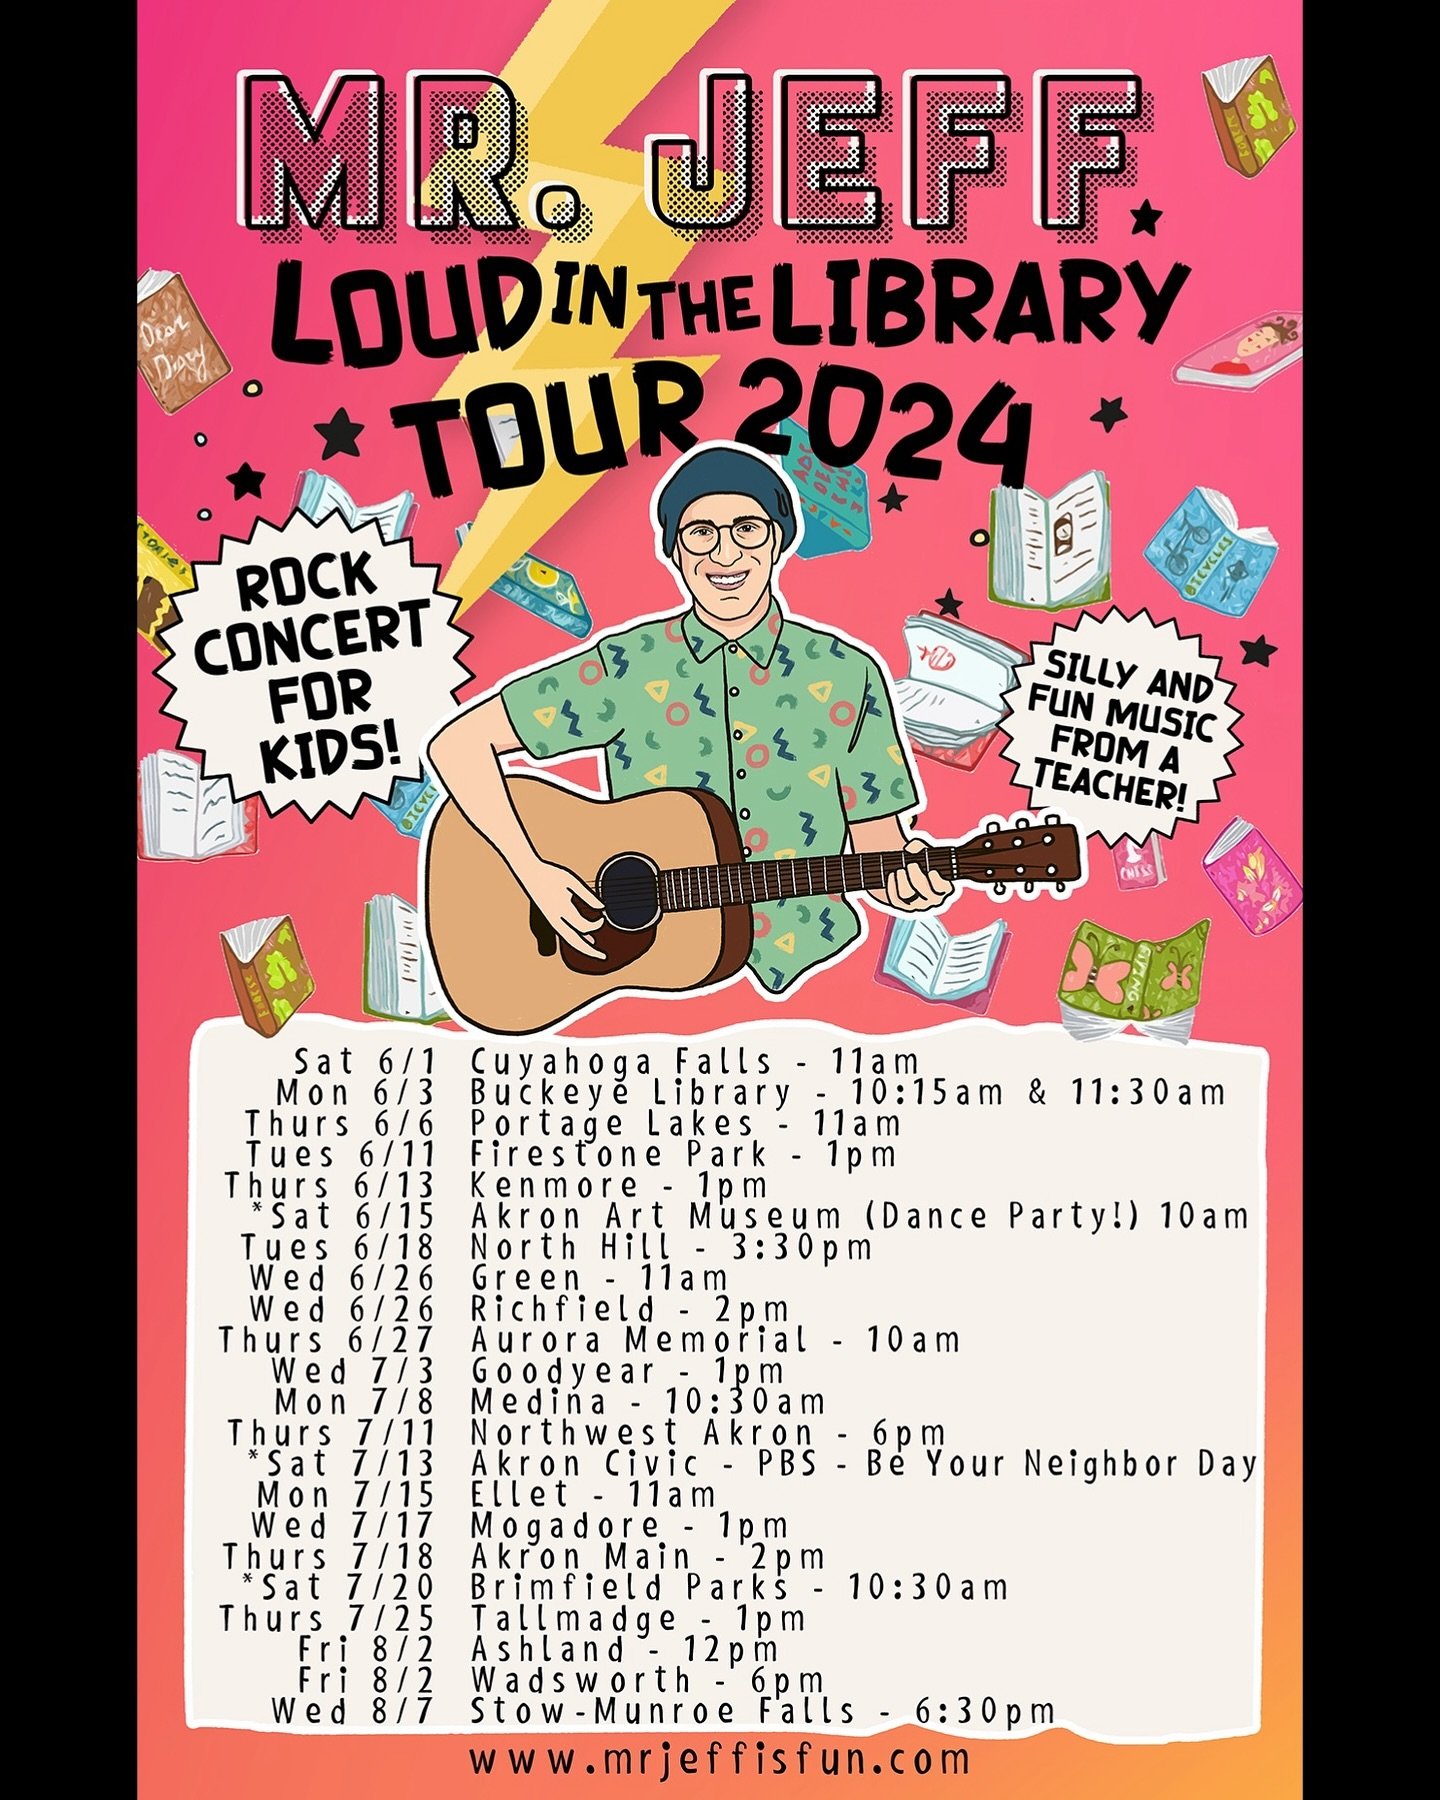 Presenting the Loud In the Library Tour 2024! 📣📚🎸🥁🫶
Twenty two shows! All free! We are working together with all these amazing libraries to encourage kids to READ more and experience their local library&rsquo;s Summer Reading Programs! Before an